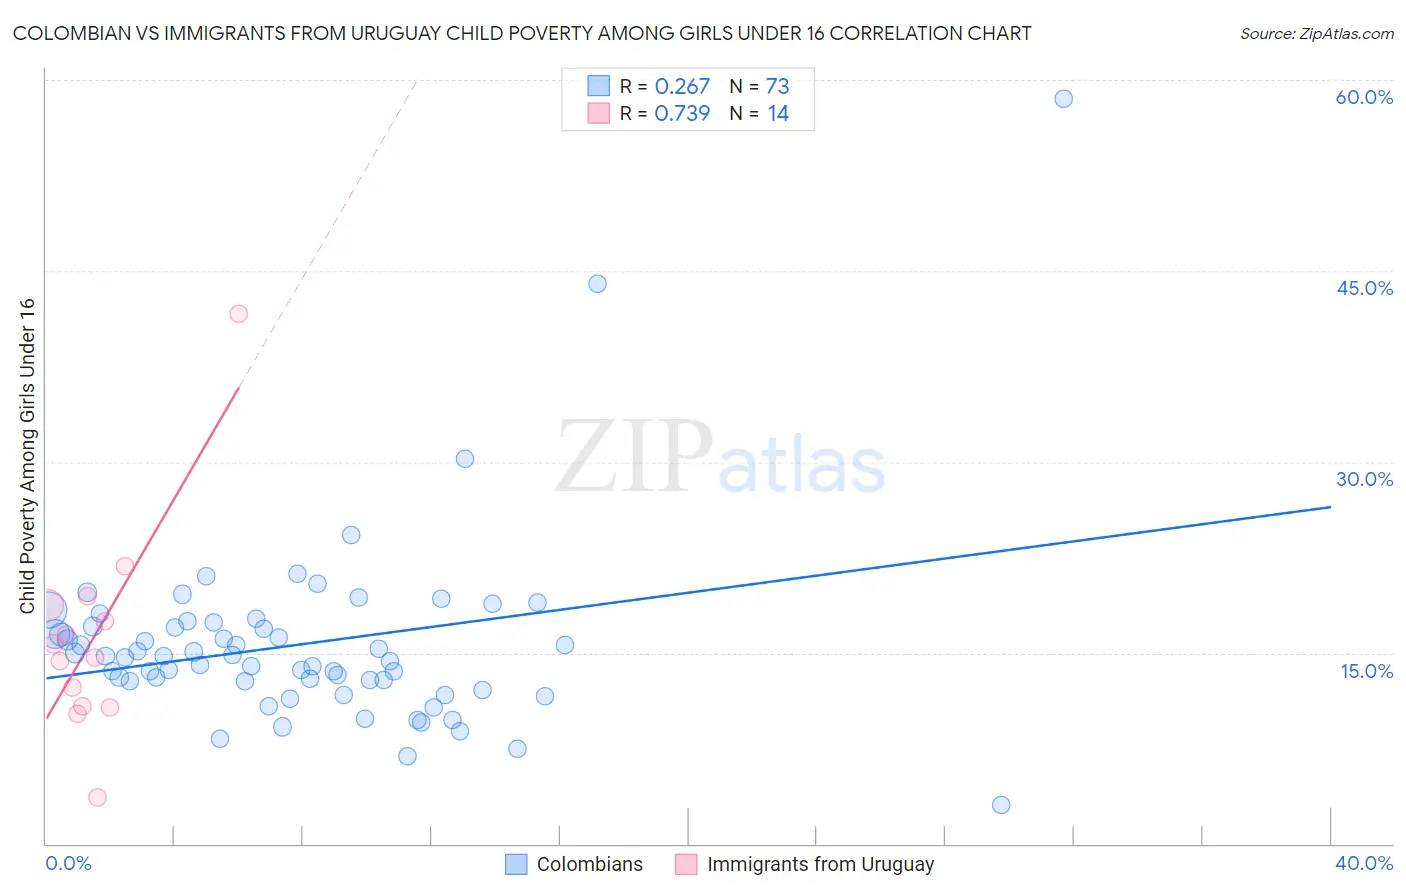 Colombian vs Immigrants from Uruguay Child Poverty Among Girls Under 16